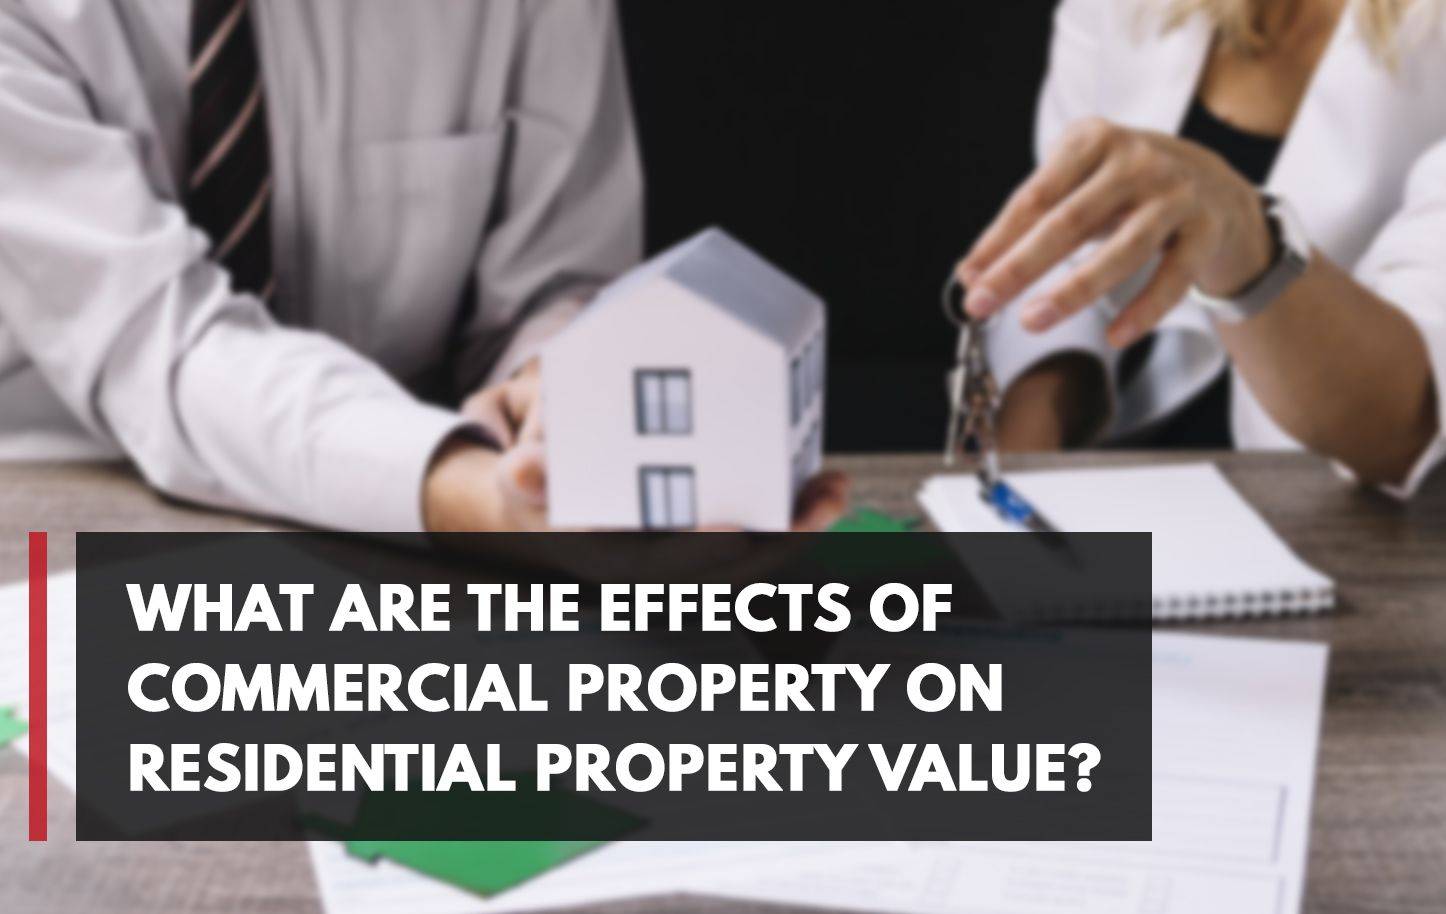 What Are the Effects of Commercial Property on Residential Property Value?